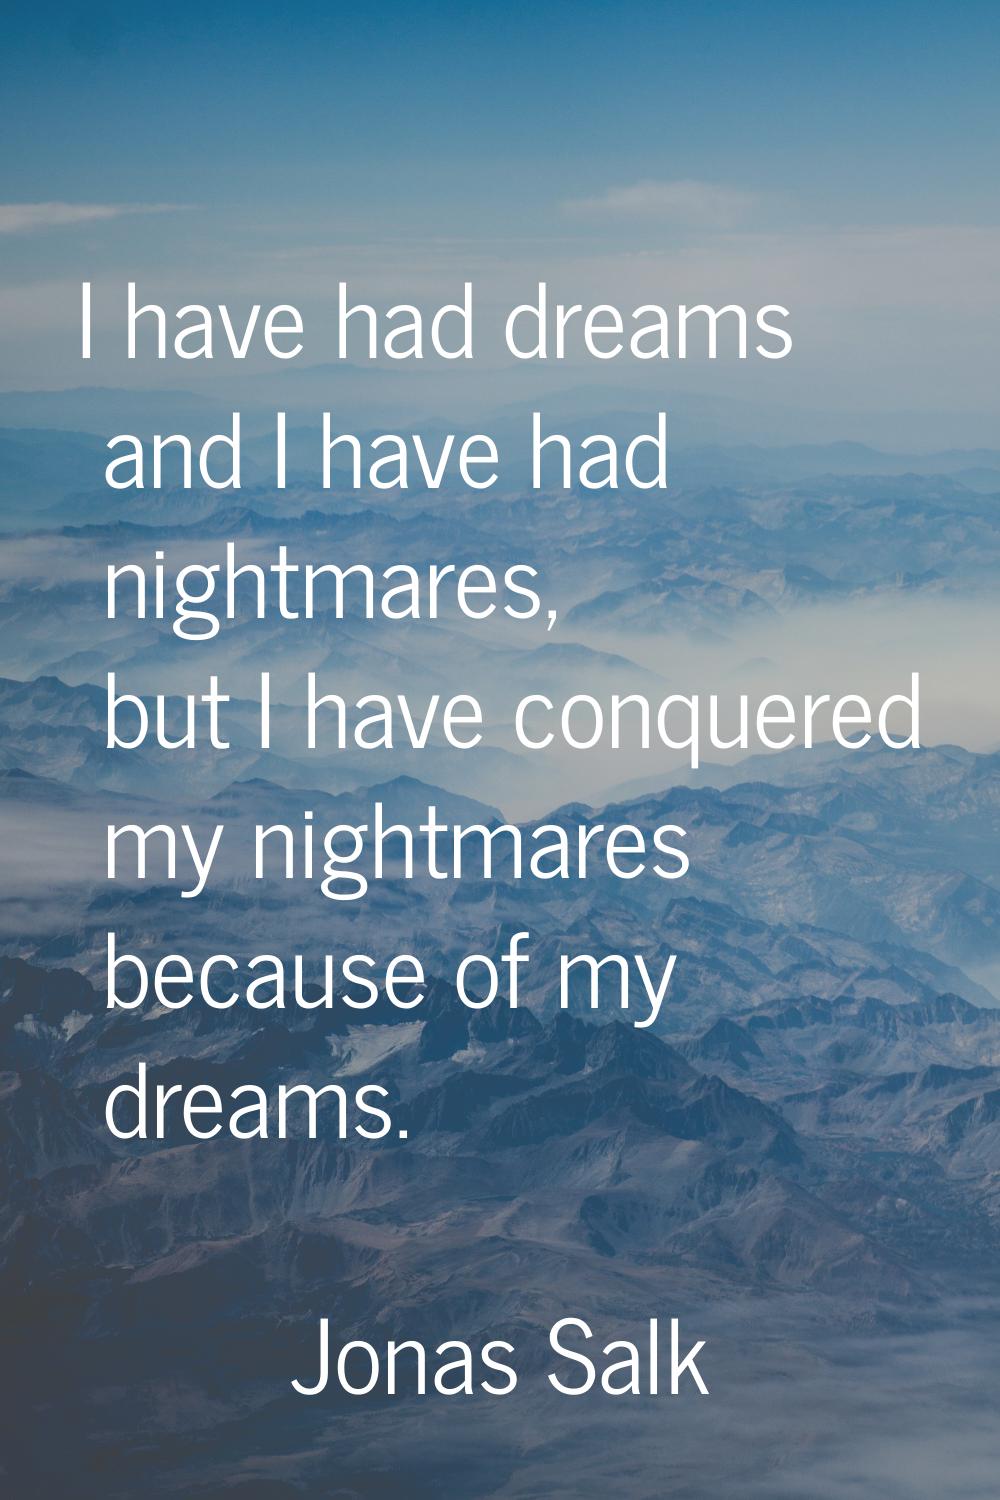 I have had dreams and I have had nightmares, but I have conquered my nightmares because of my dream